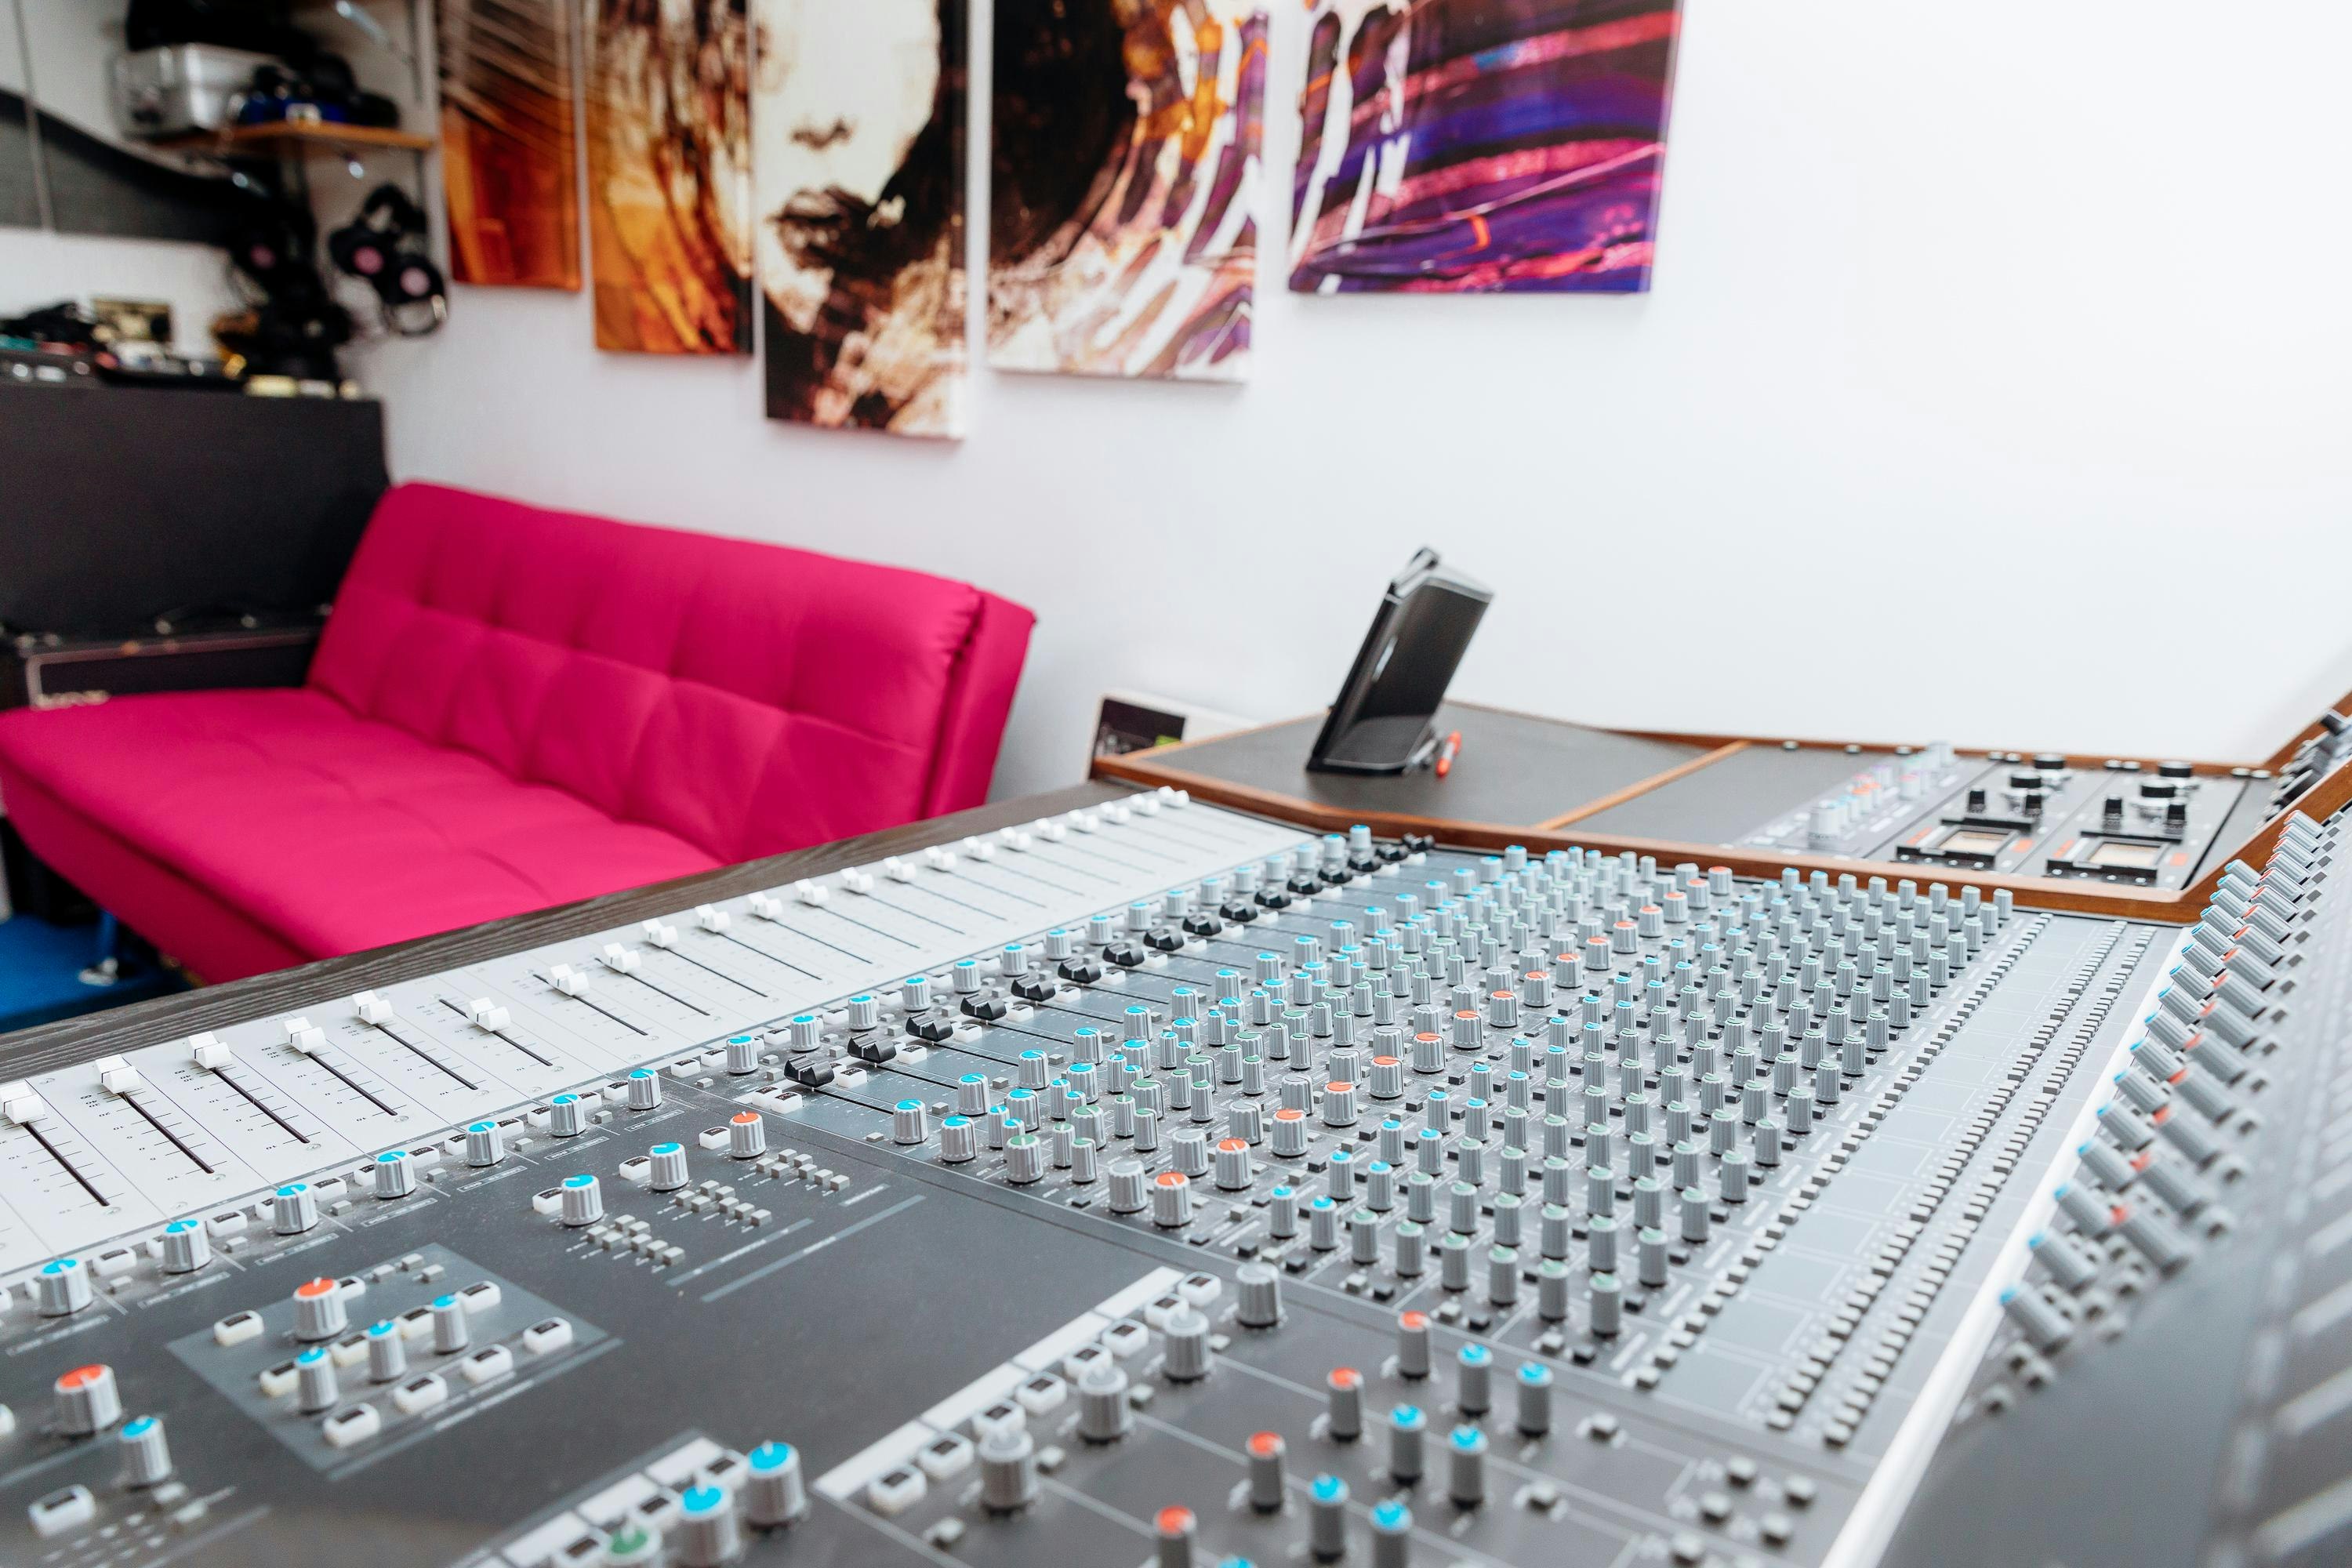 Podcast Studios Venues in London - The Sound Bank